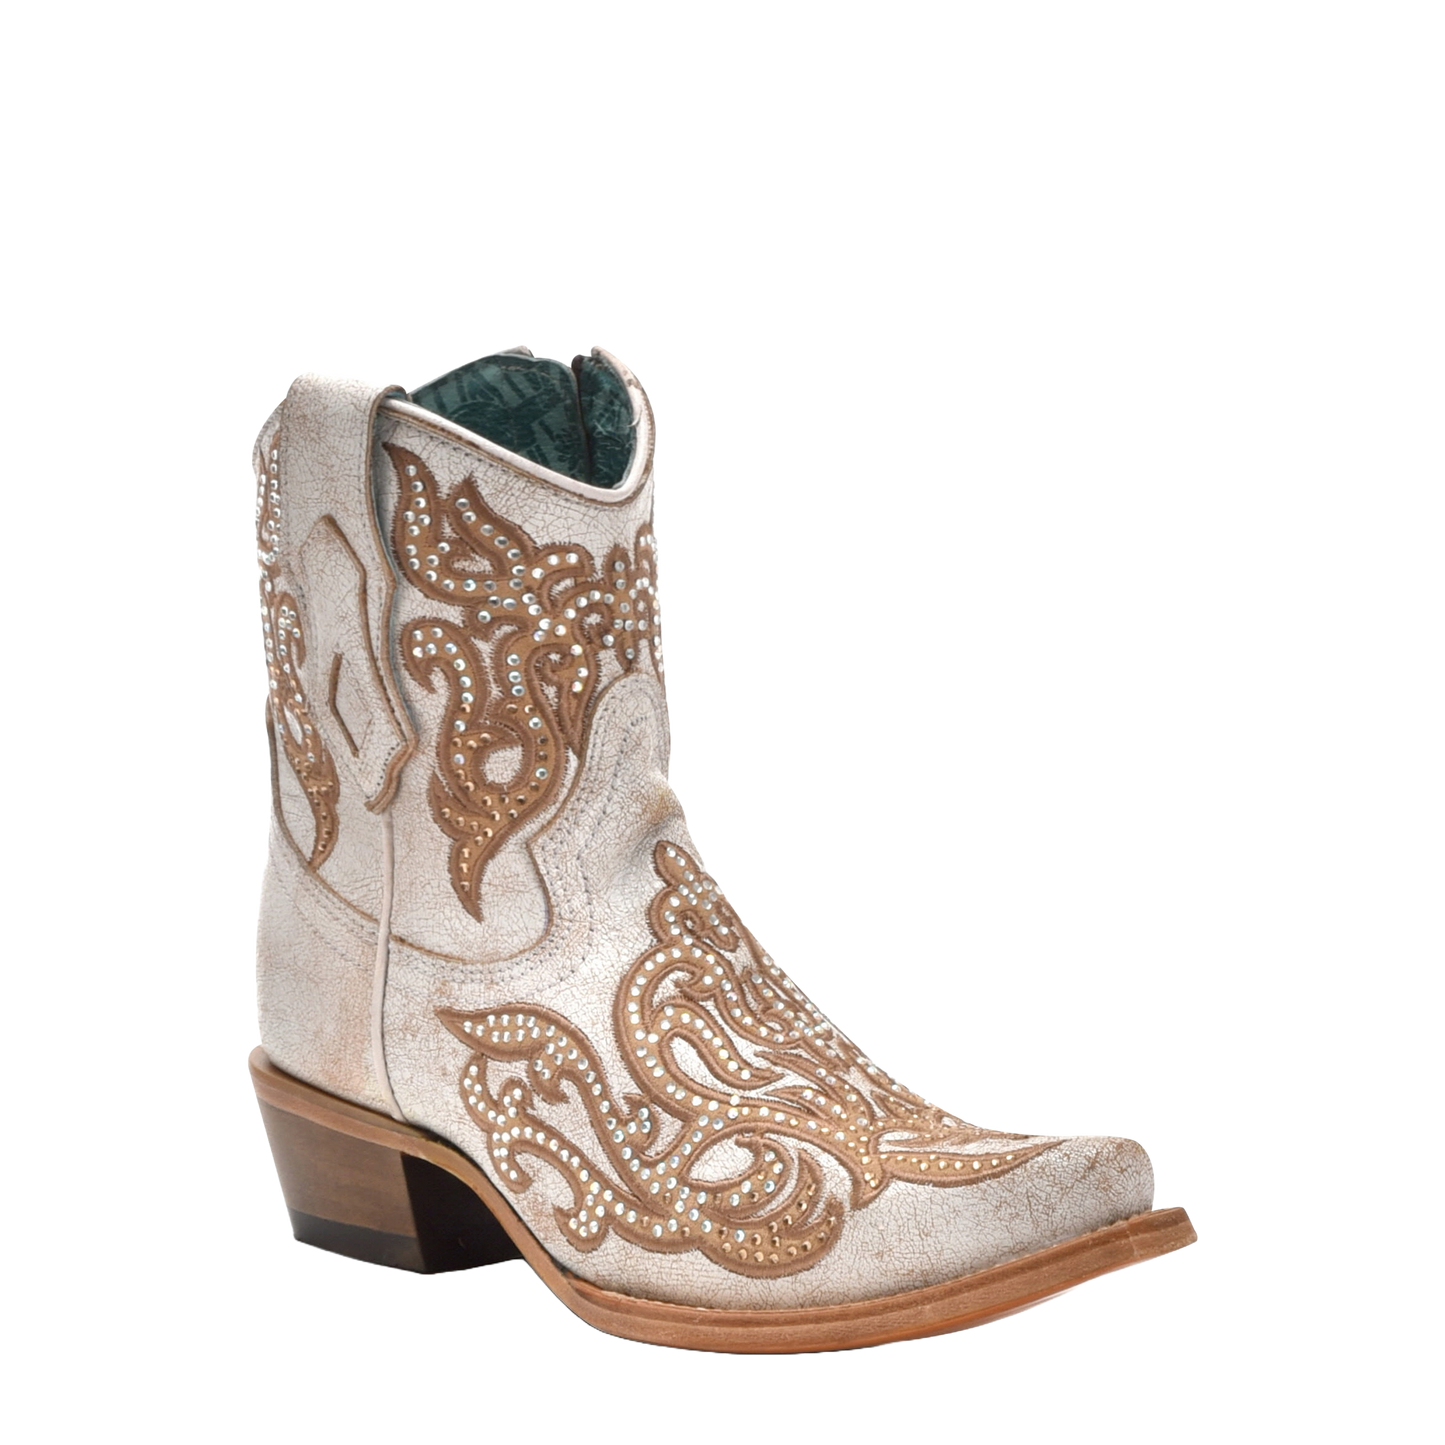 Corral Ladies Distressed Embroidery White-Honey Zipper Ankle Boots C4104